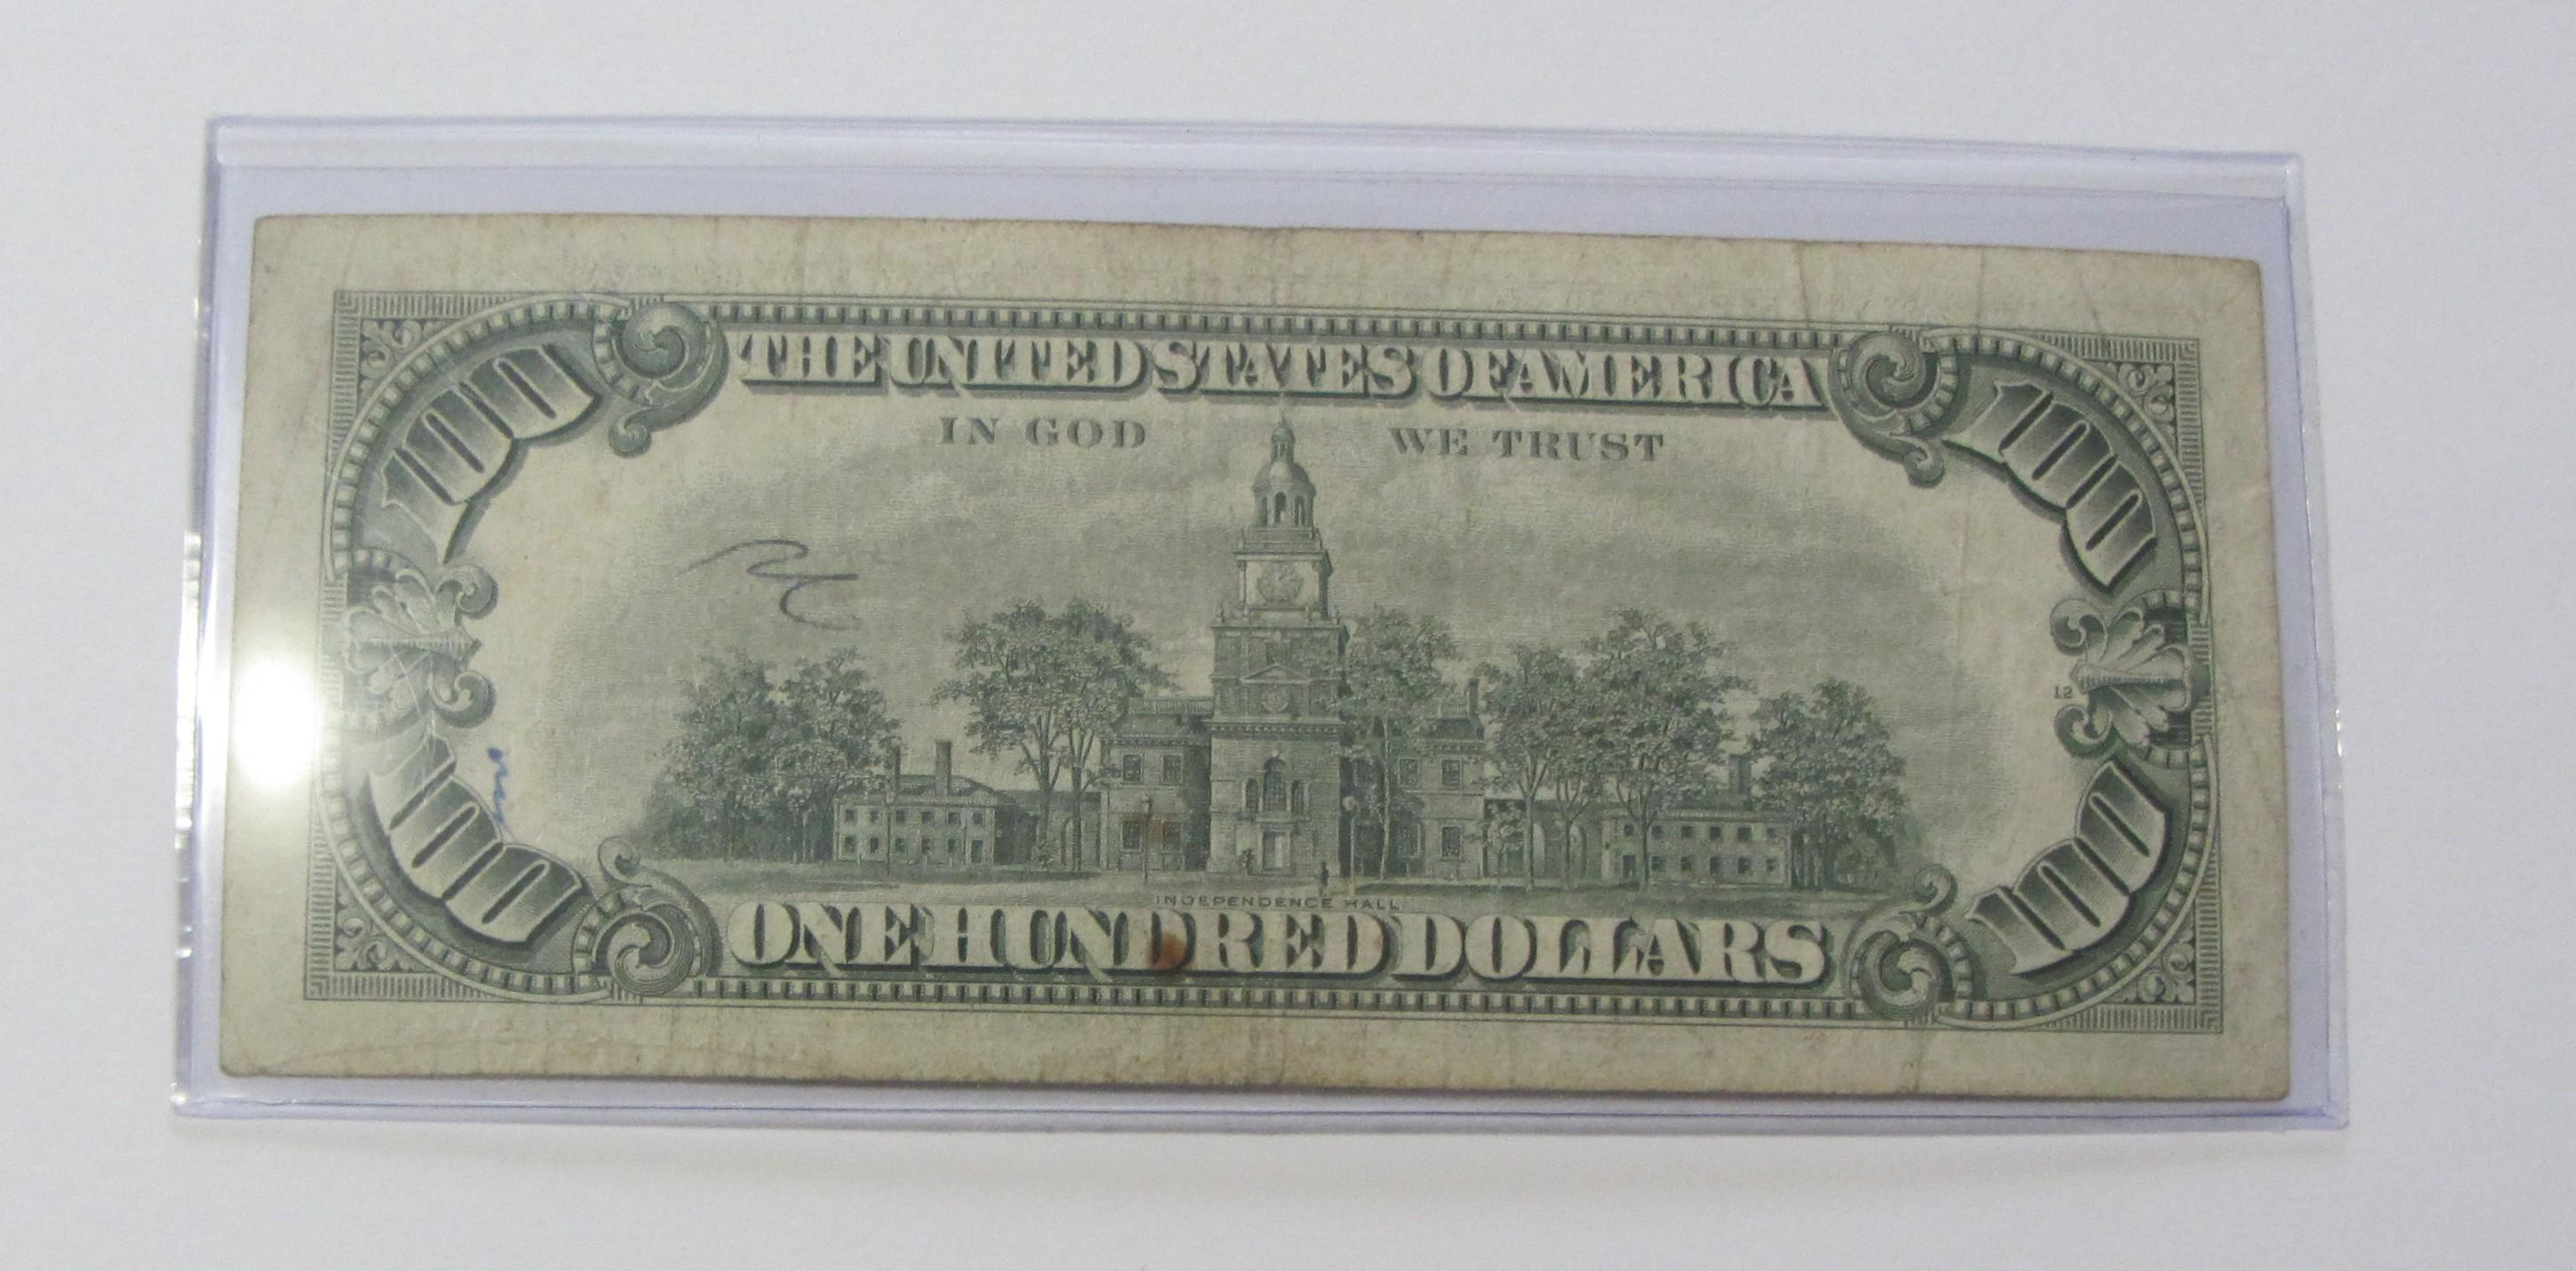 $100 FEDERAL RESERVE NOTE STAR 1969-A